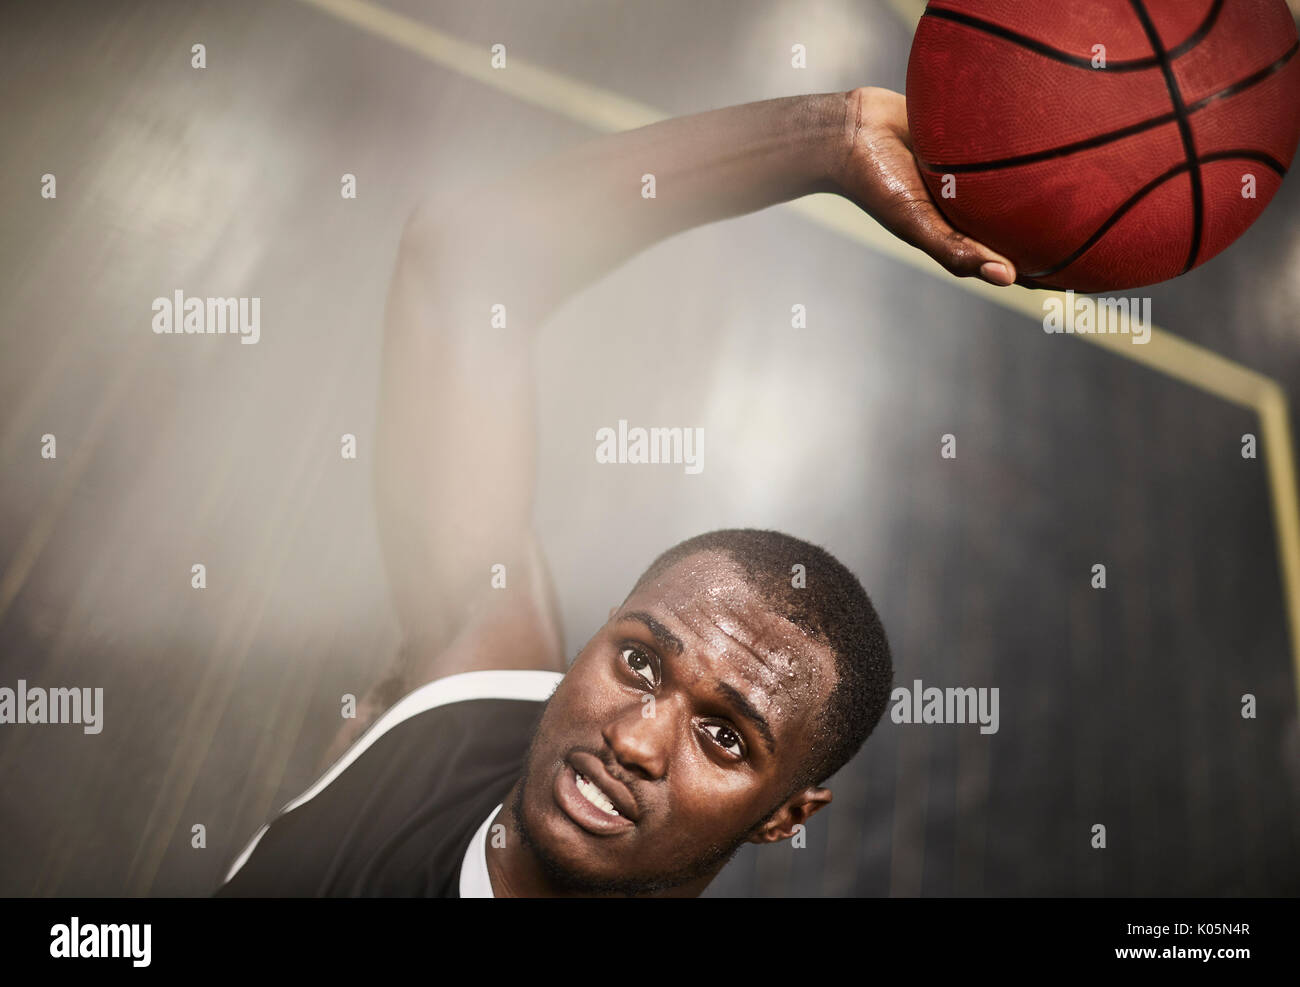 Overhead view determined young male basketball player shooting the ball Stock Photo